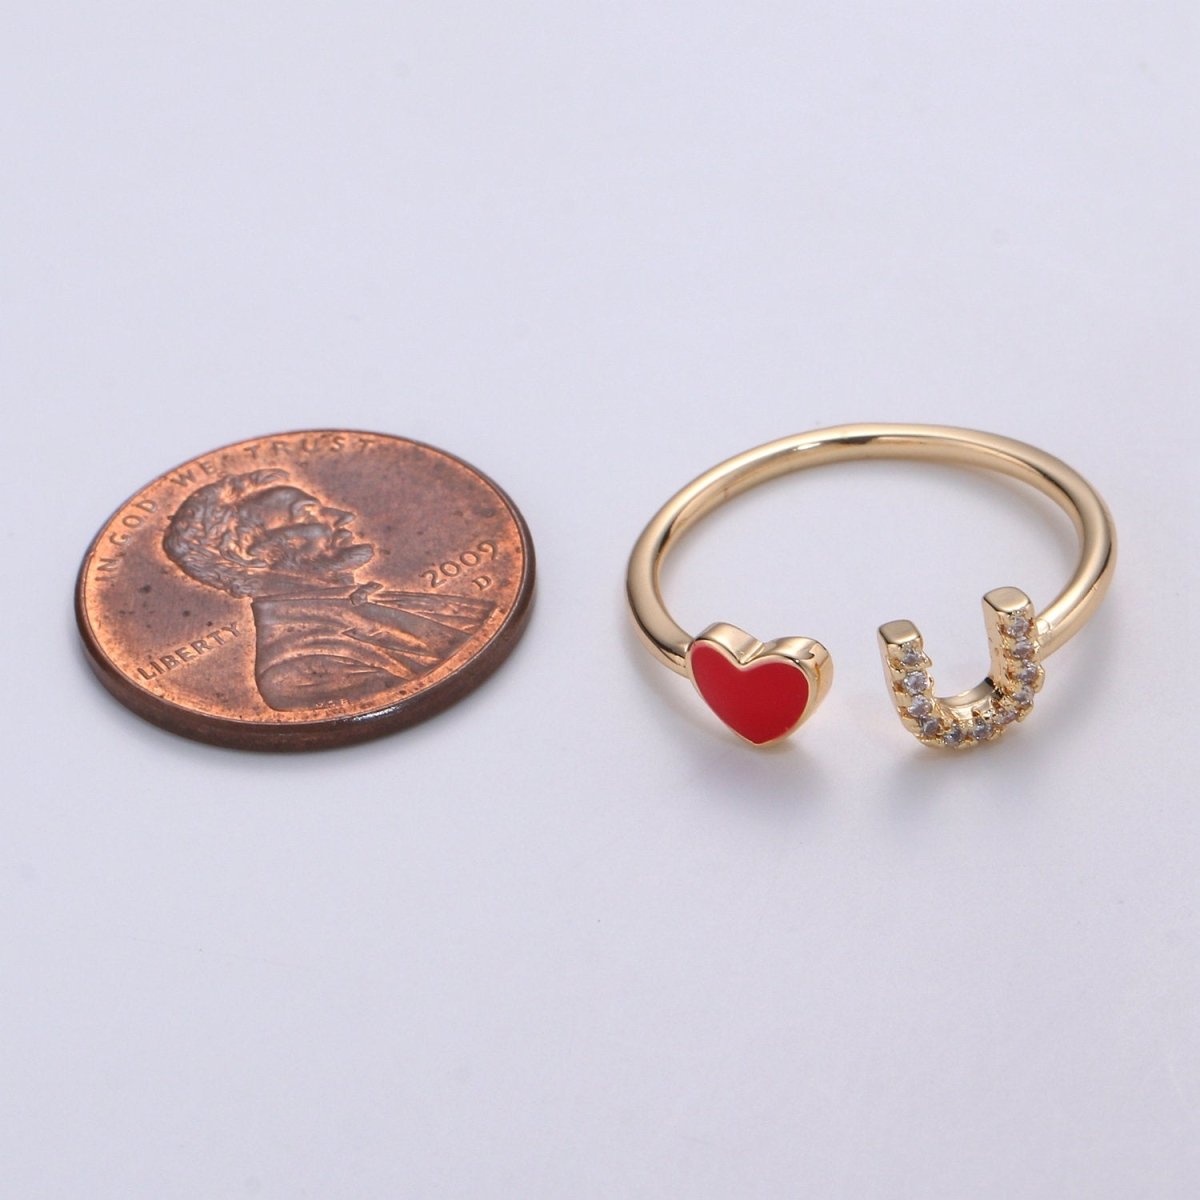 Gold Rings For Women Gold Cz Ring Red Heart Ring Dainty Ring Minimalist Ring Christmast Gift Thin Open Ring Gold Jewelry Heart Ring Love u R-076 - DLUXCA